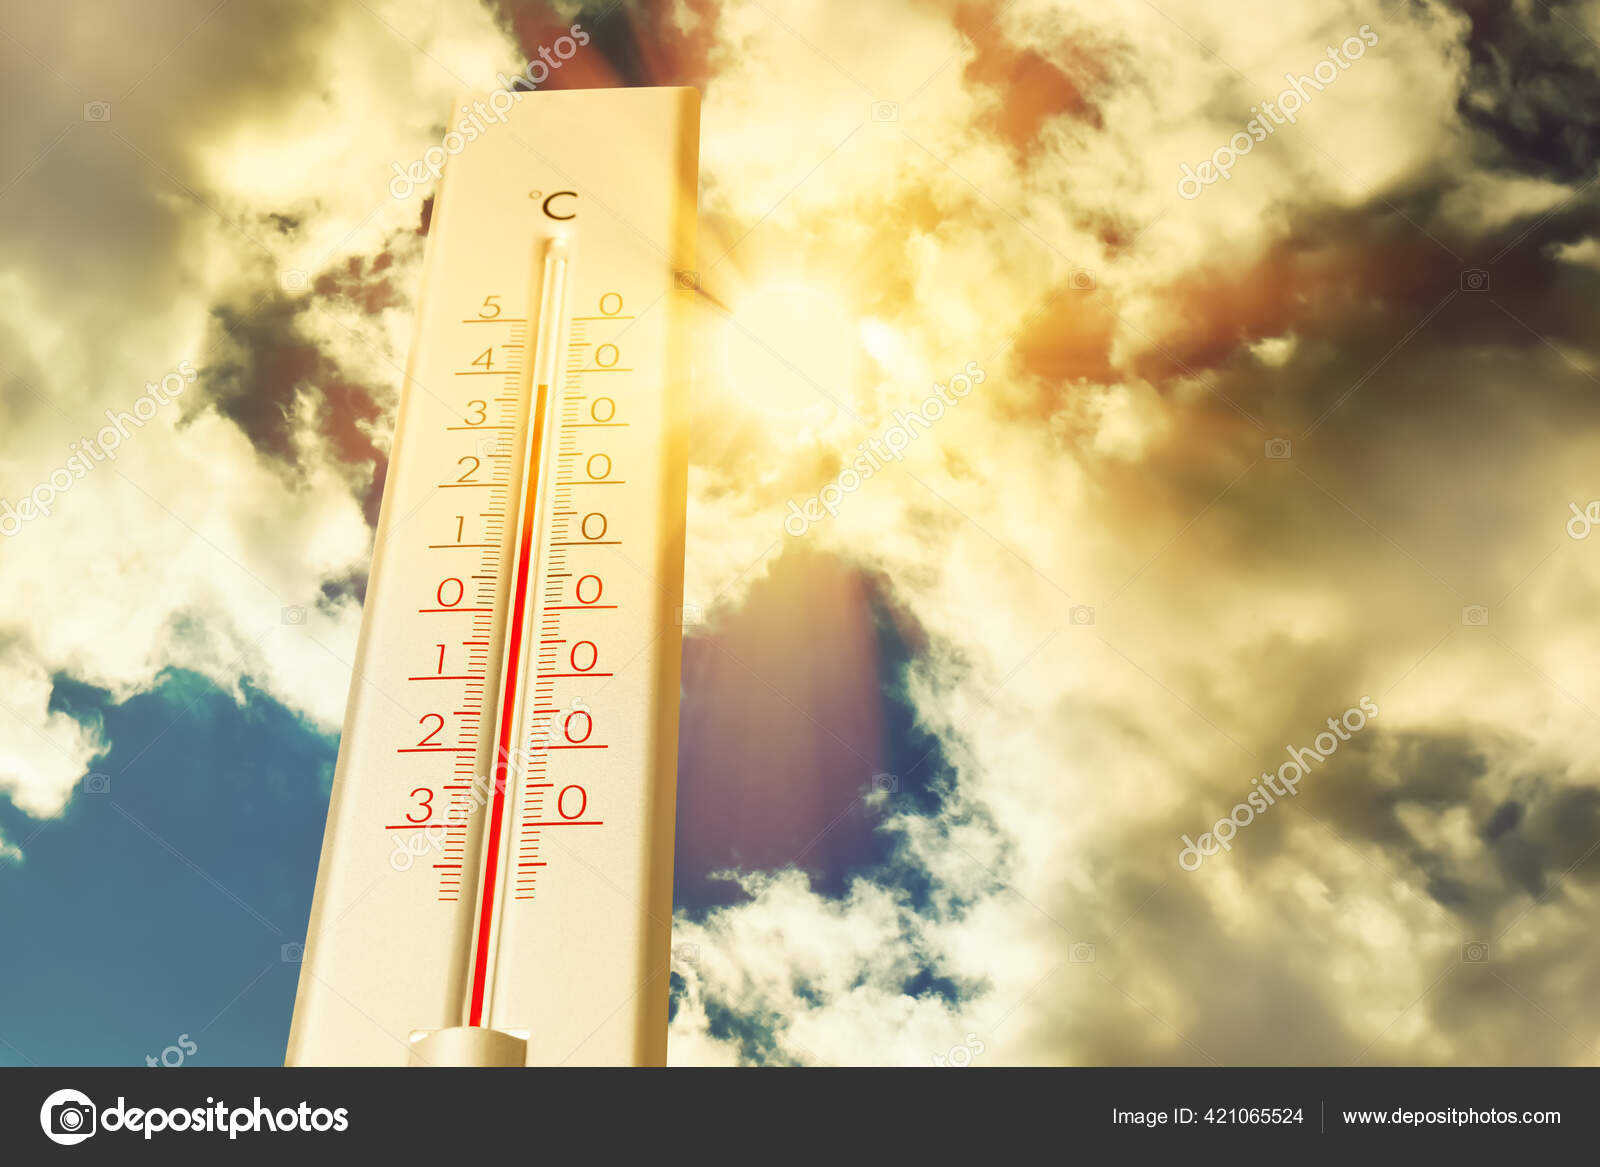 https://st2.depositphotos.com/16122460/42106/i/1600/depositphotos_421065524-stock-photo-weather-thermometer-showing-high-temperature.jpg